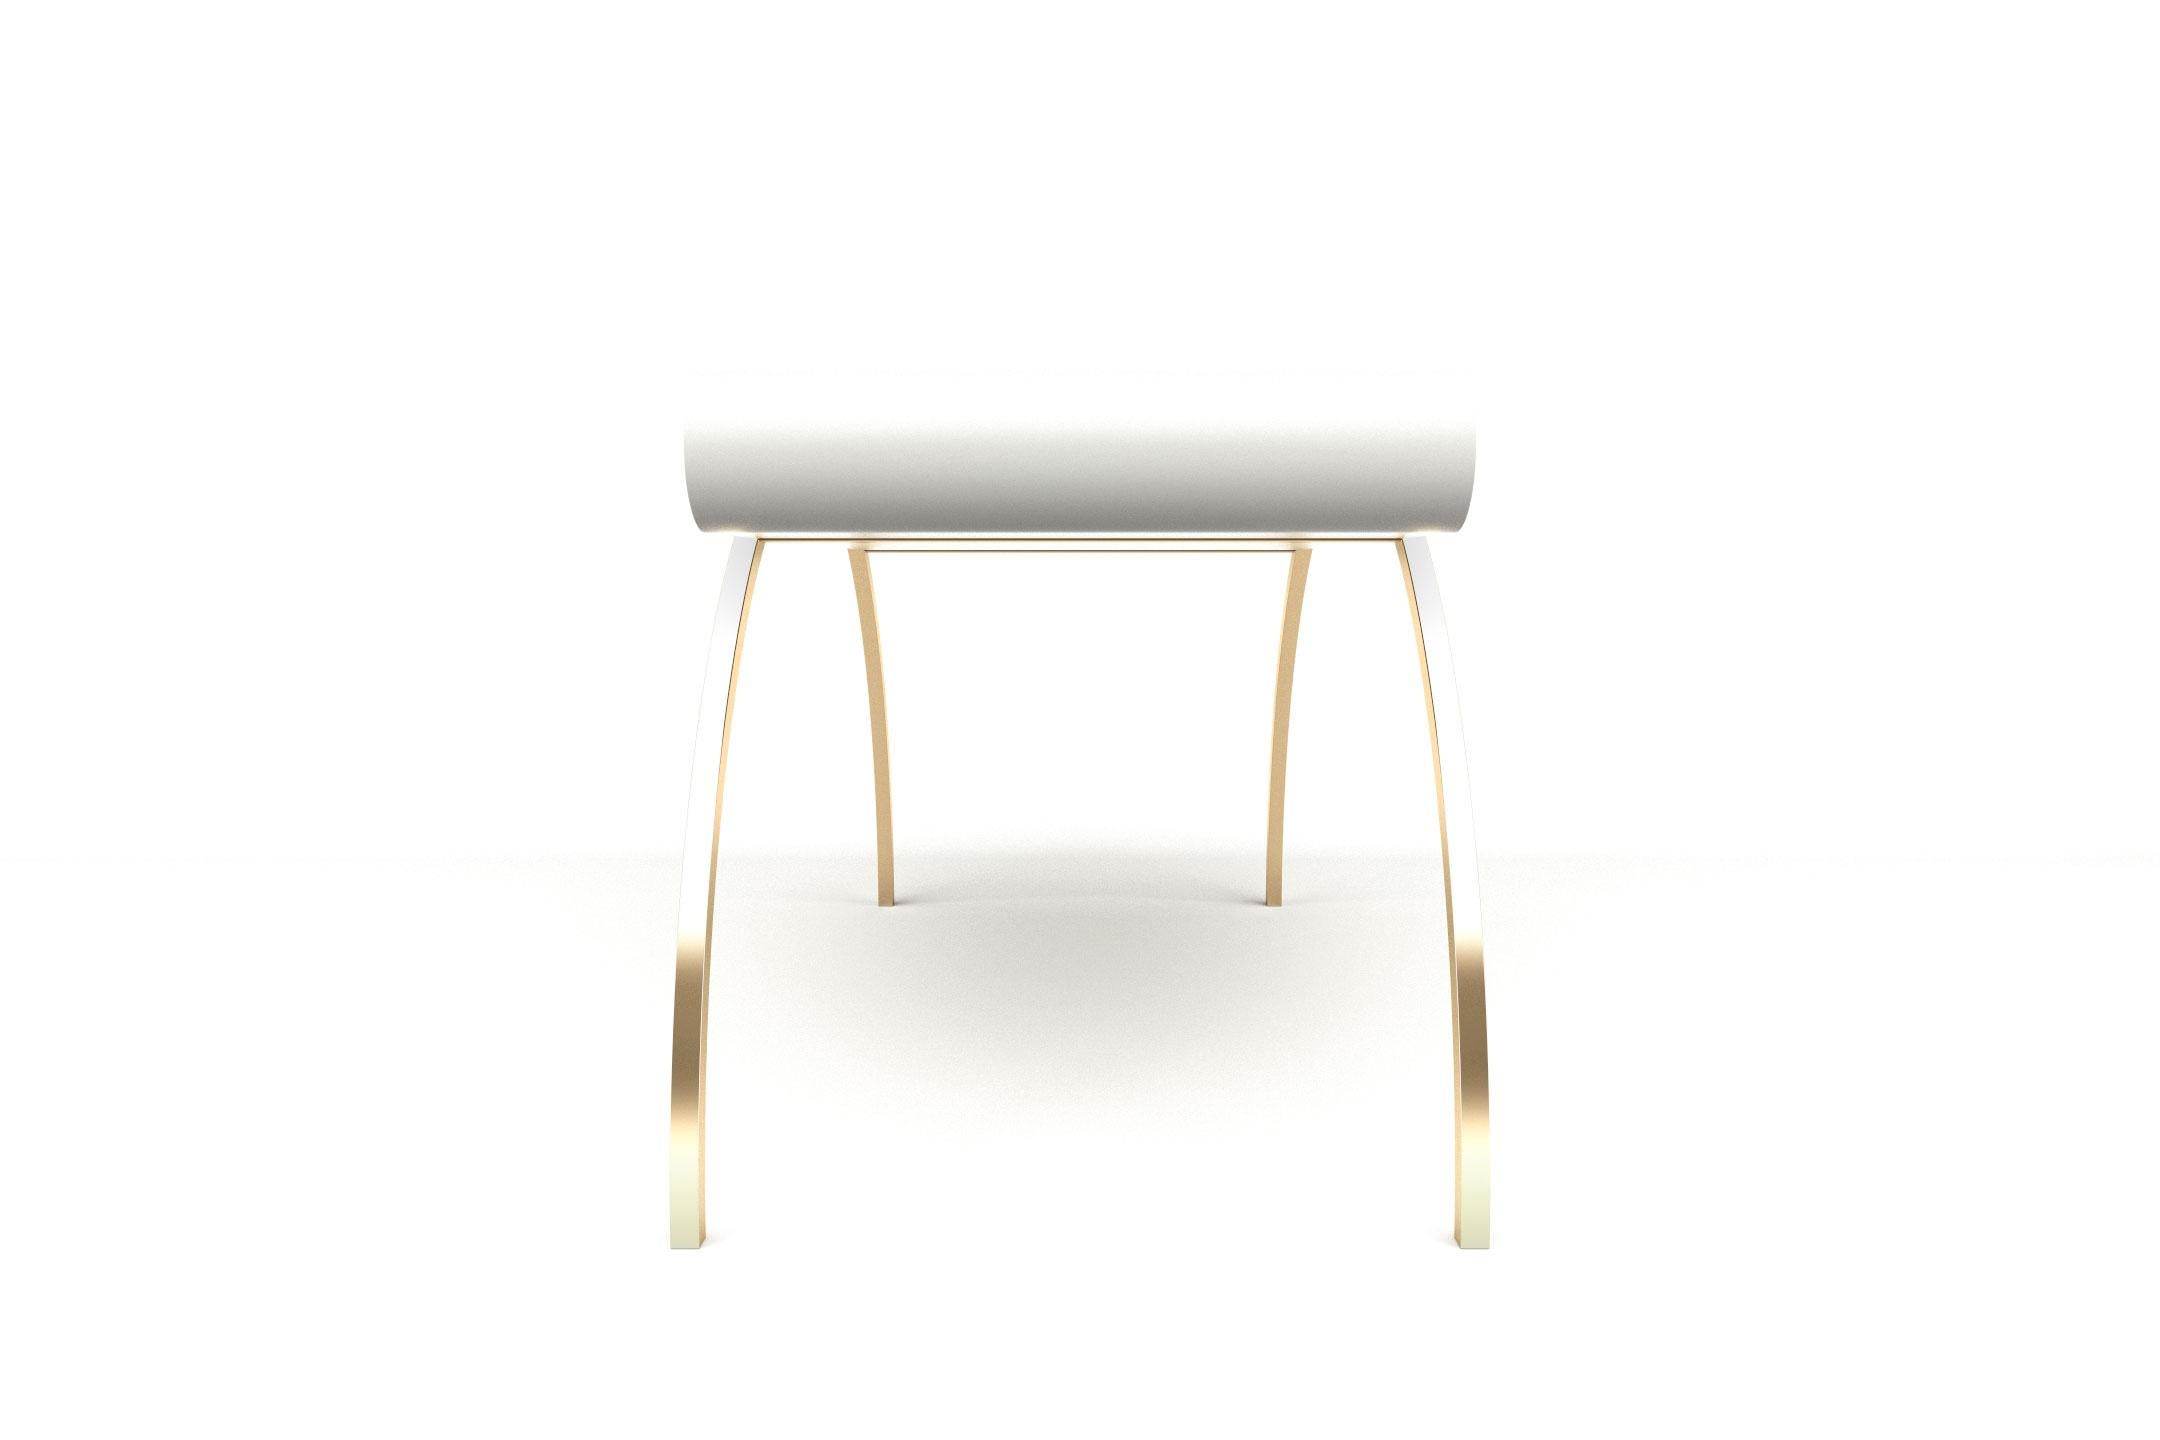 Crescent Desk - Modern White Lacquered Desk with Brass Legs In New Condition For Sale In London, GB